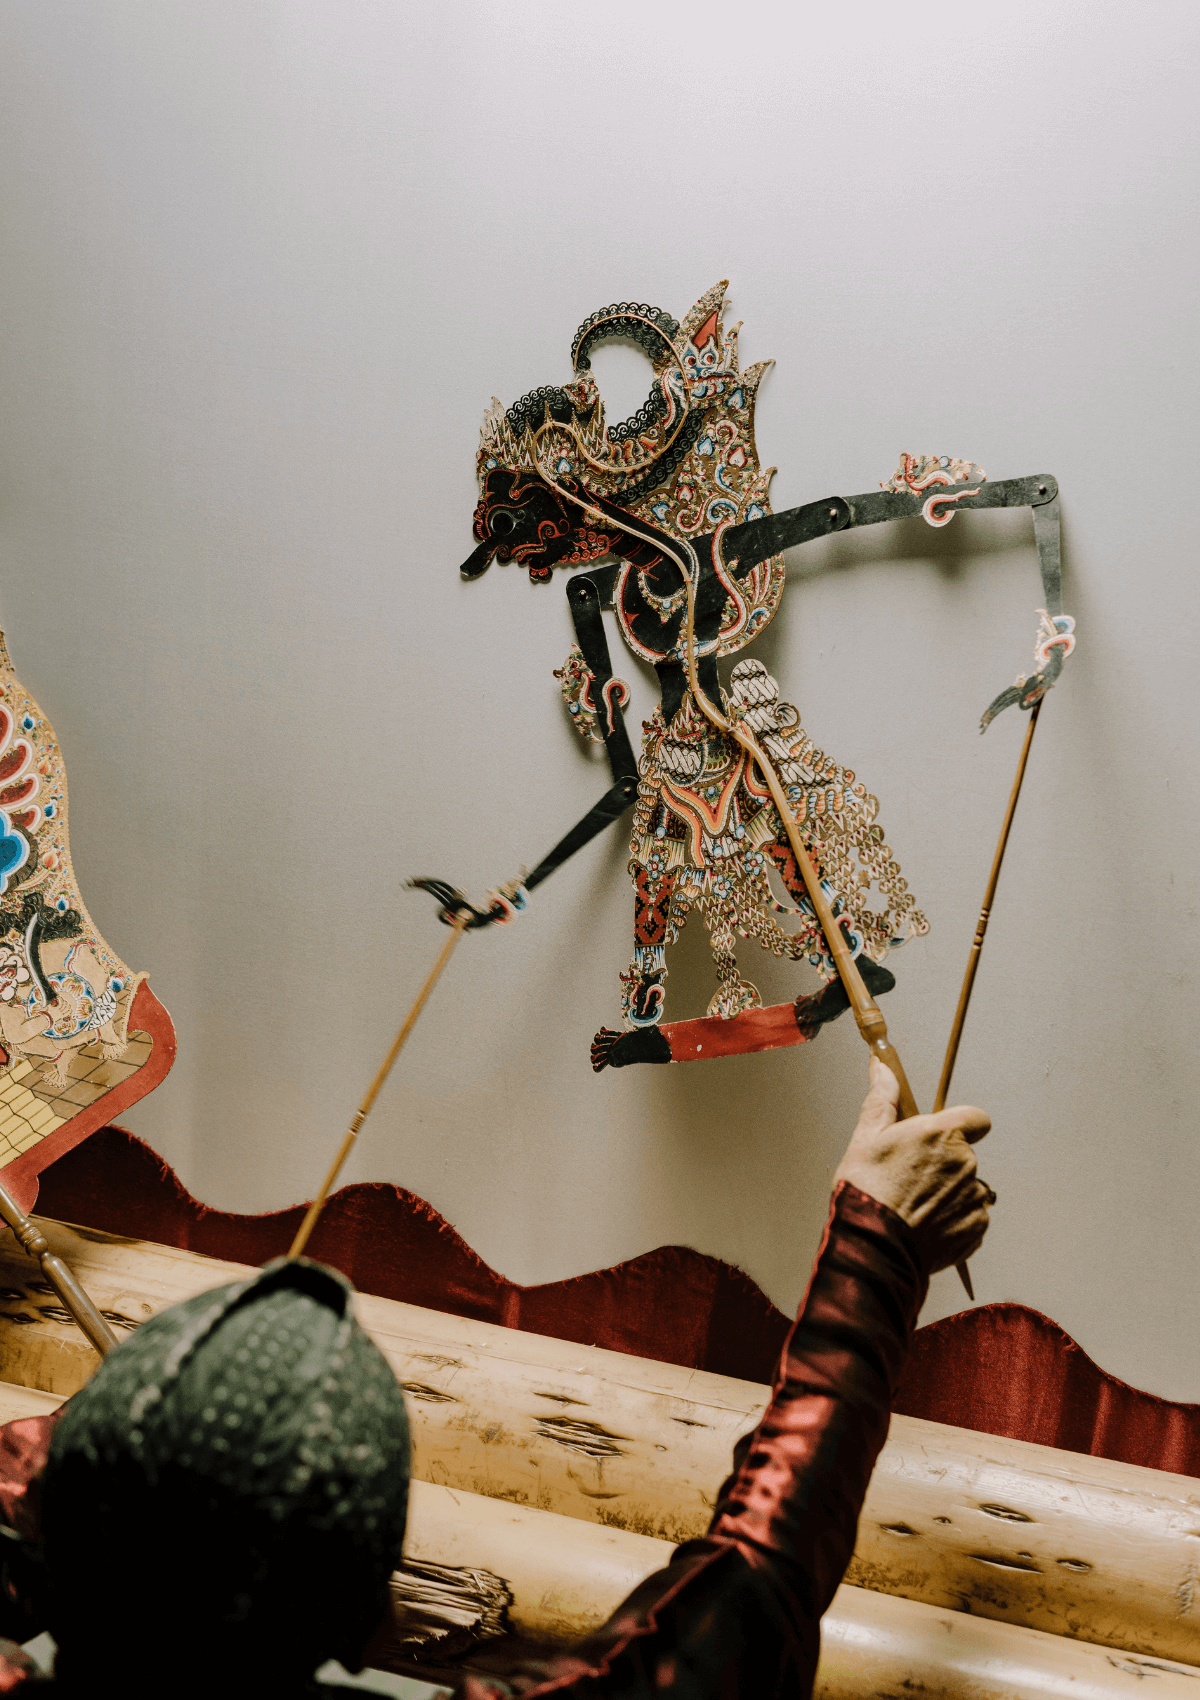 Wayang puppets are the best souvenirs from Indonesia for kids